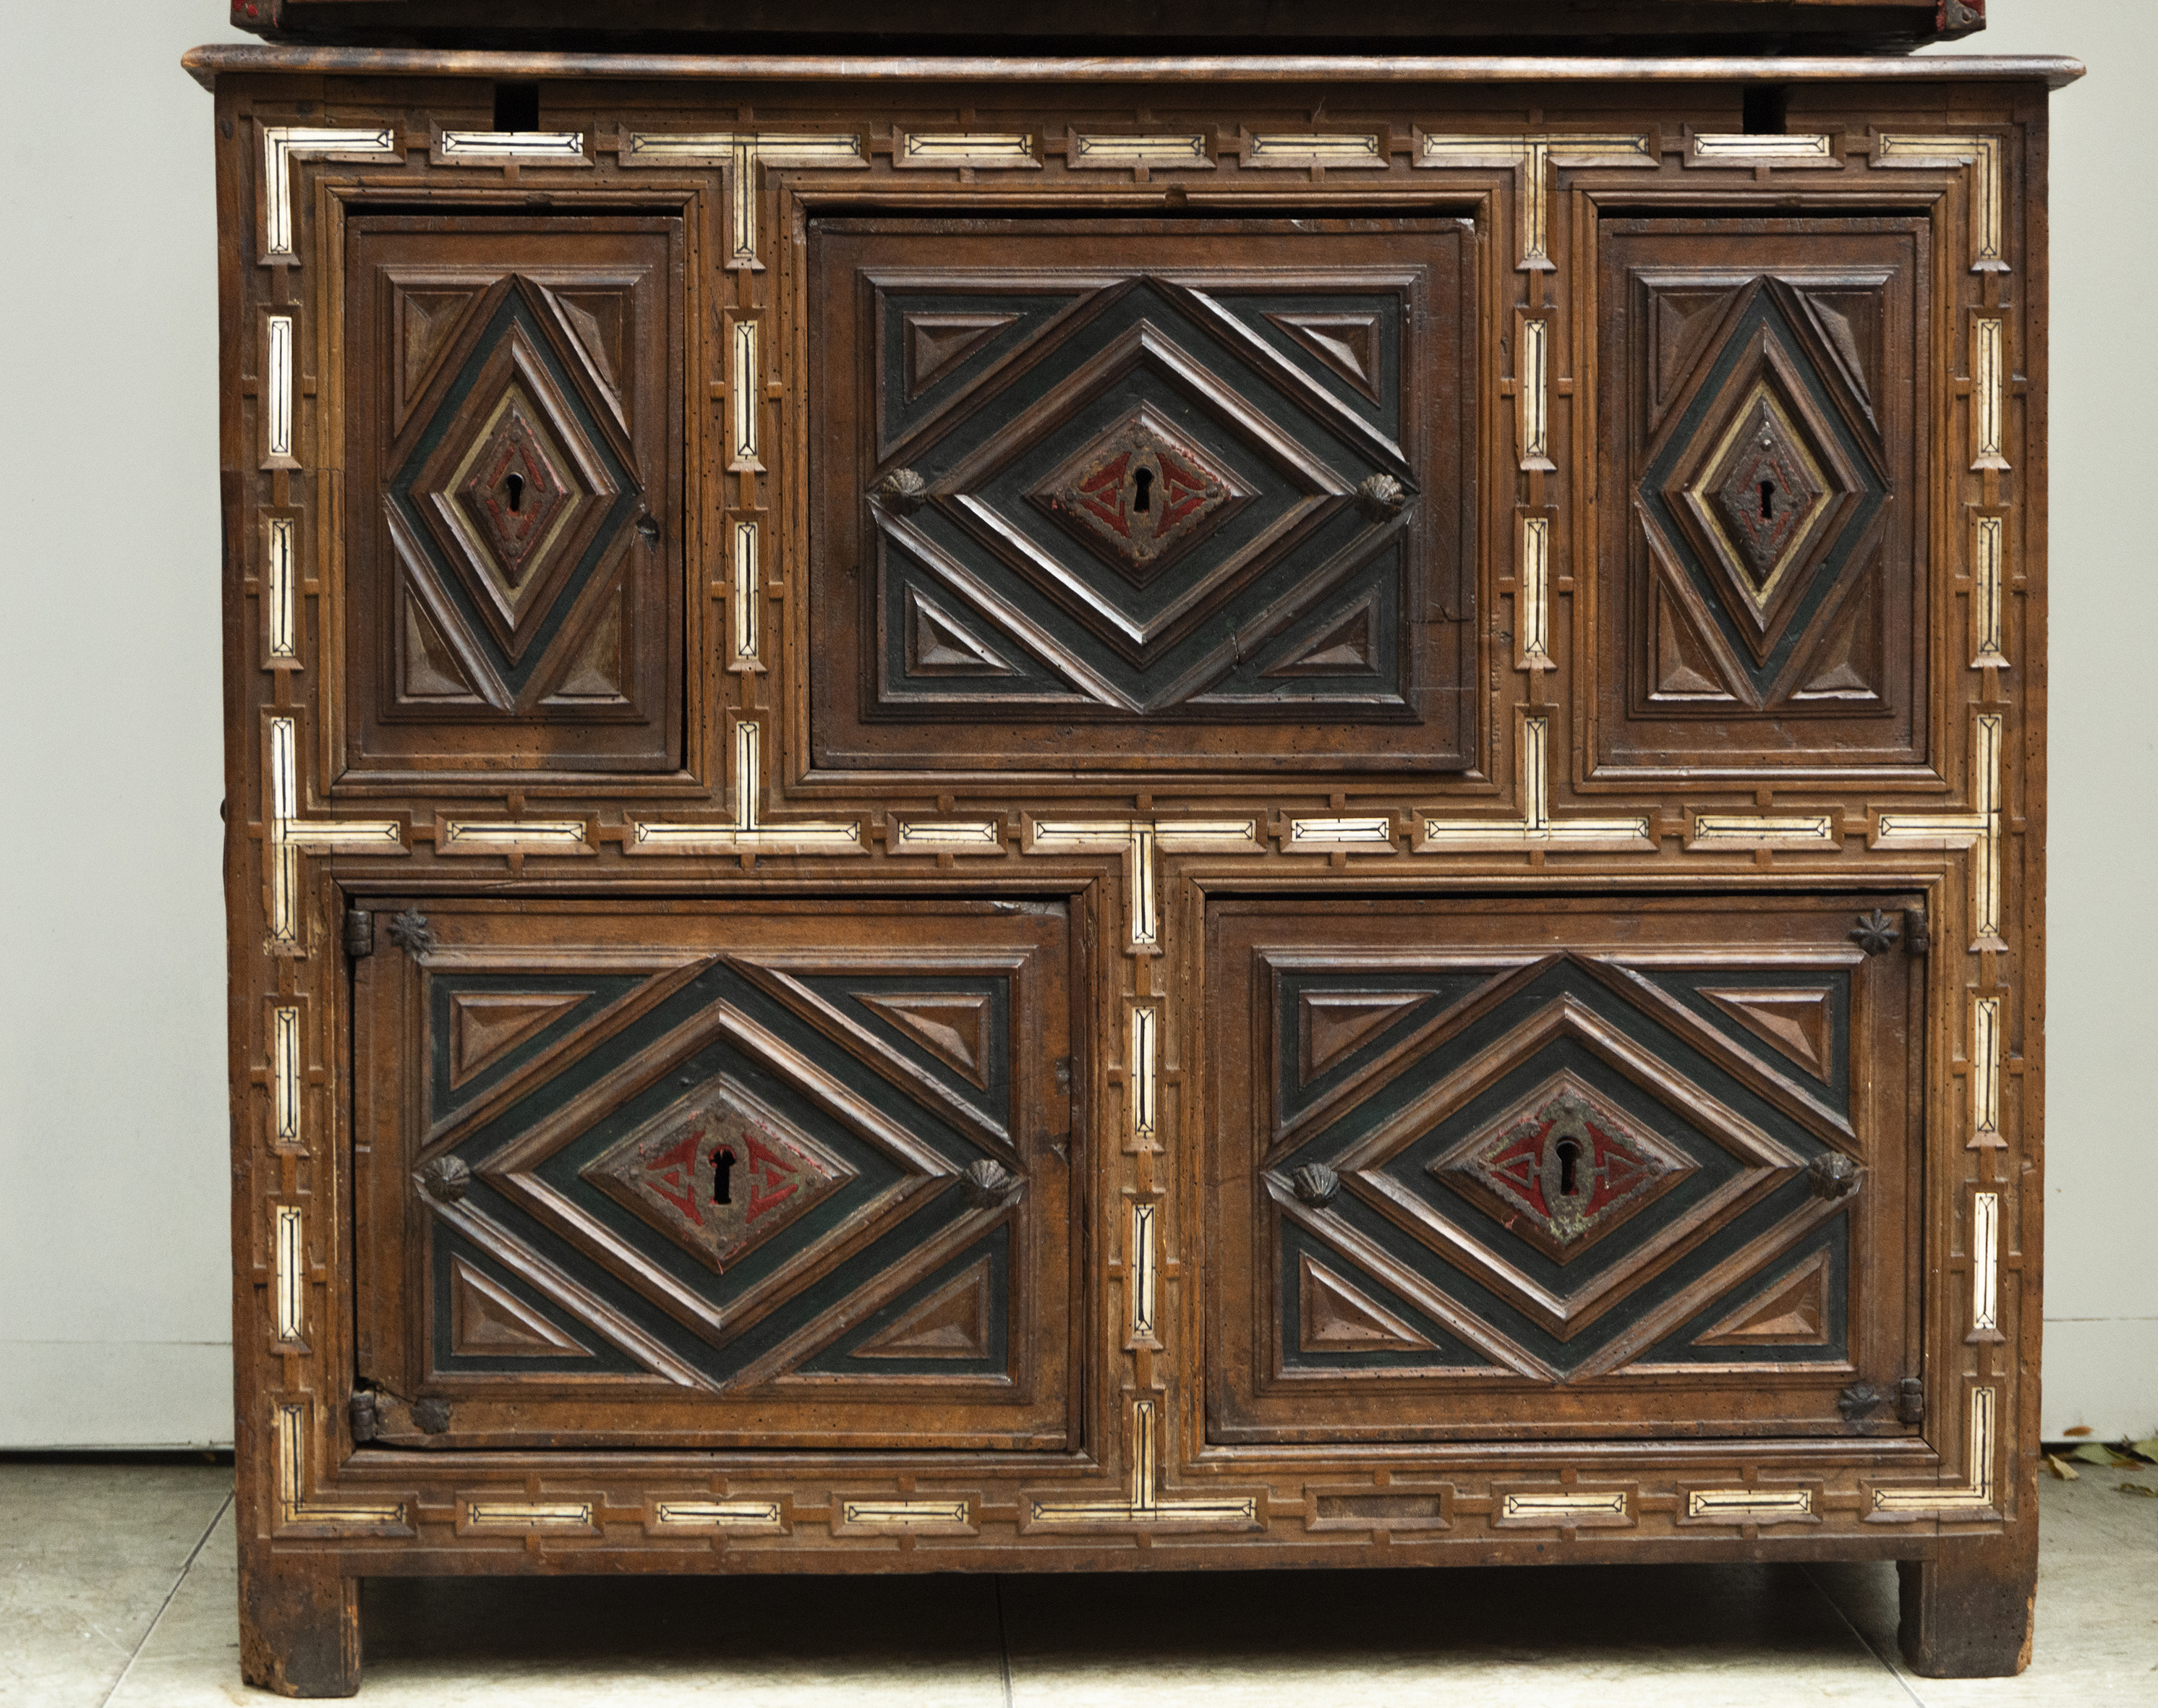 Renaissance Vargas "Bargueño" type chest cabinet with period table, 16th century - Image 5 of 8